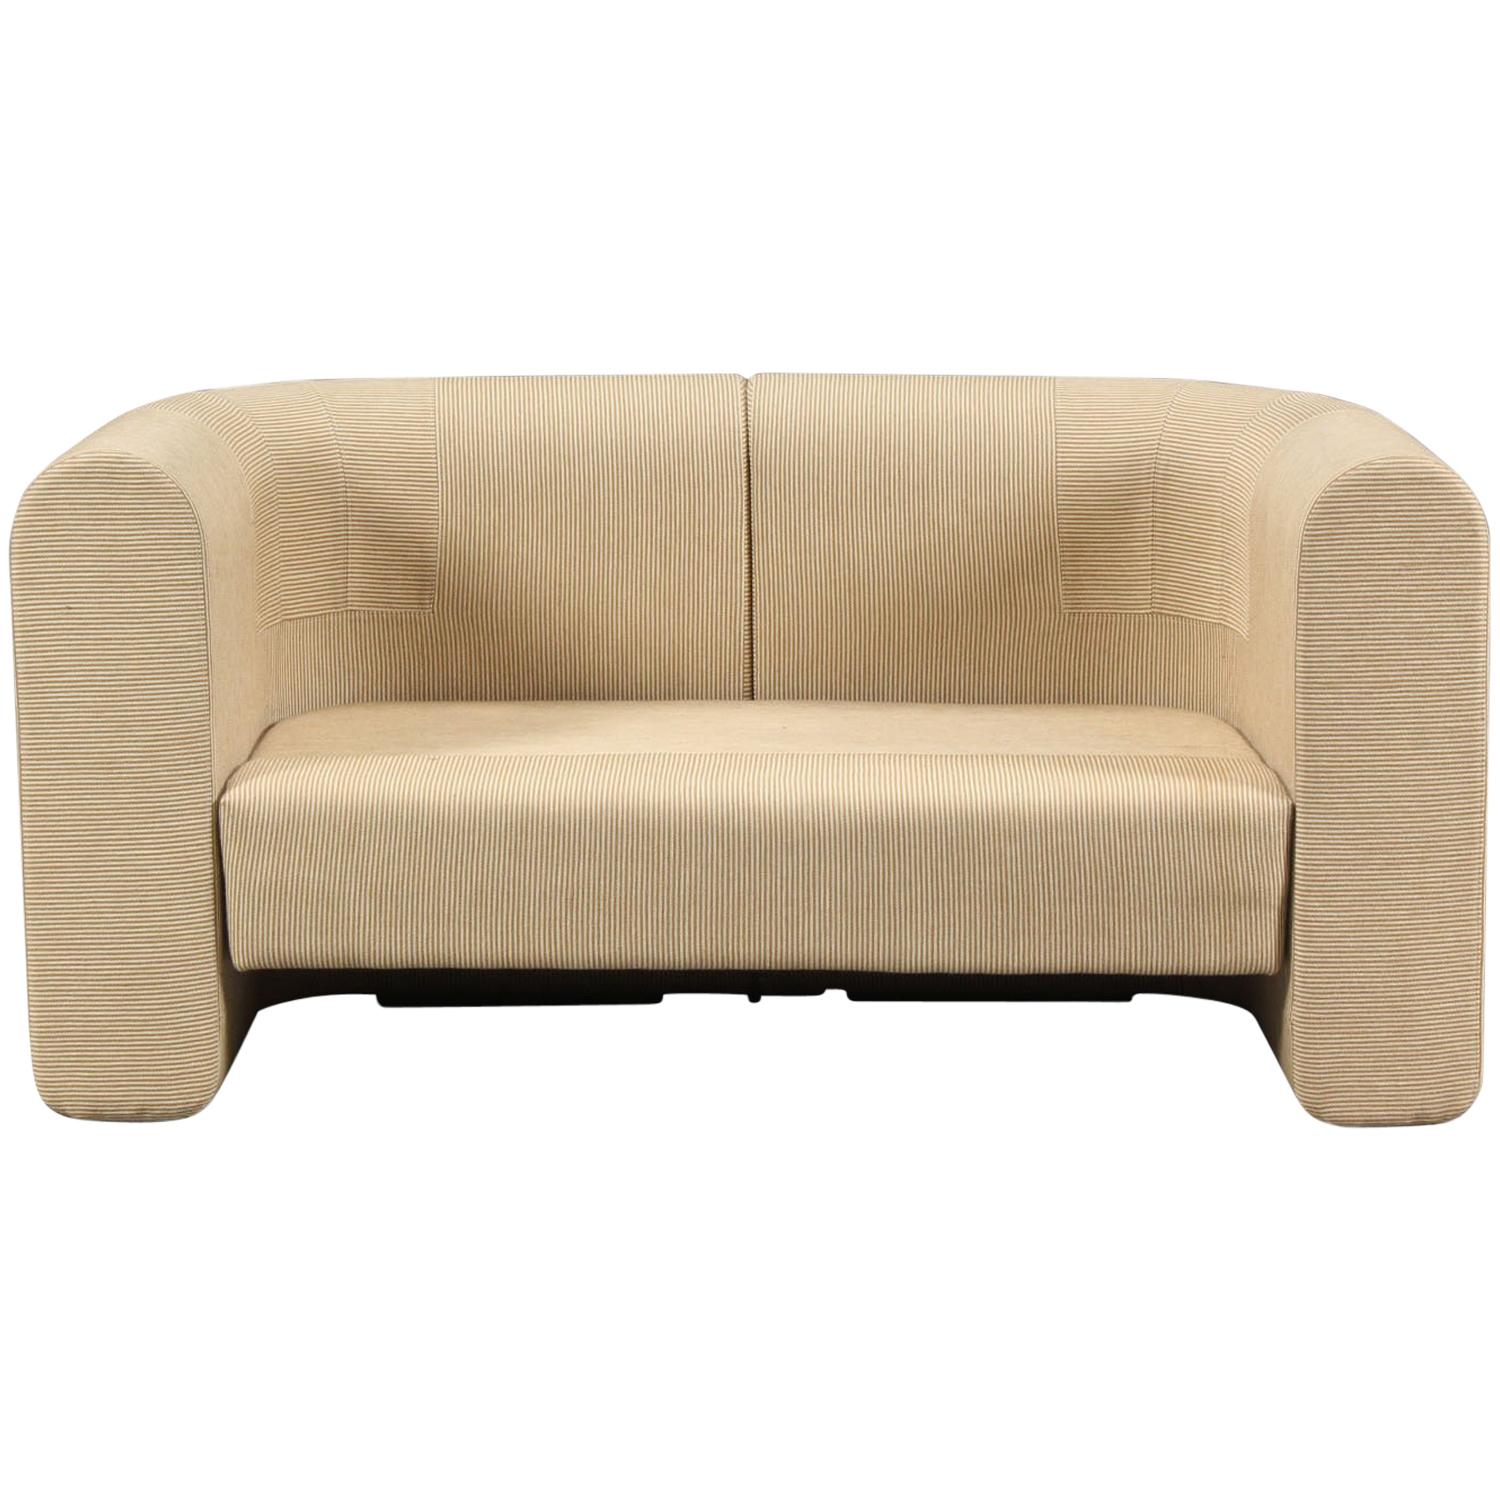 Two-Seat Sofa For Sale